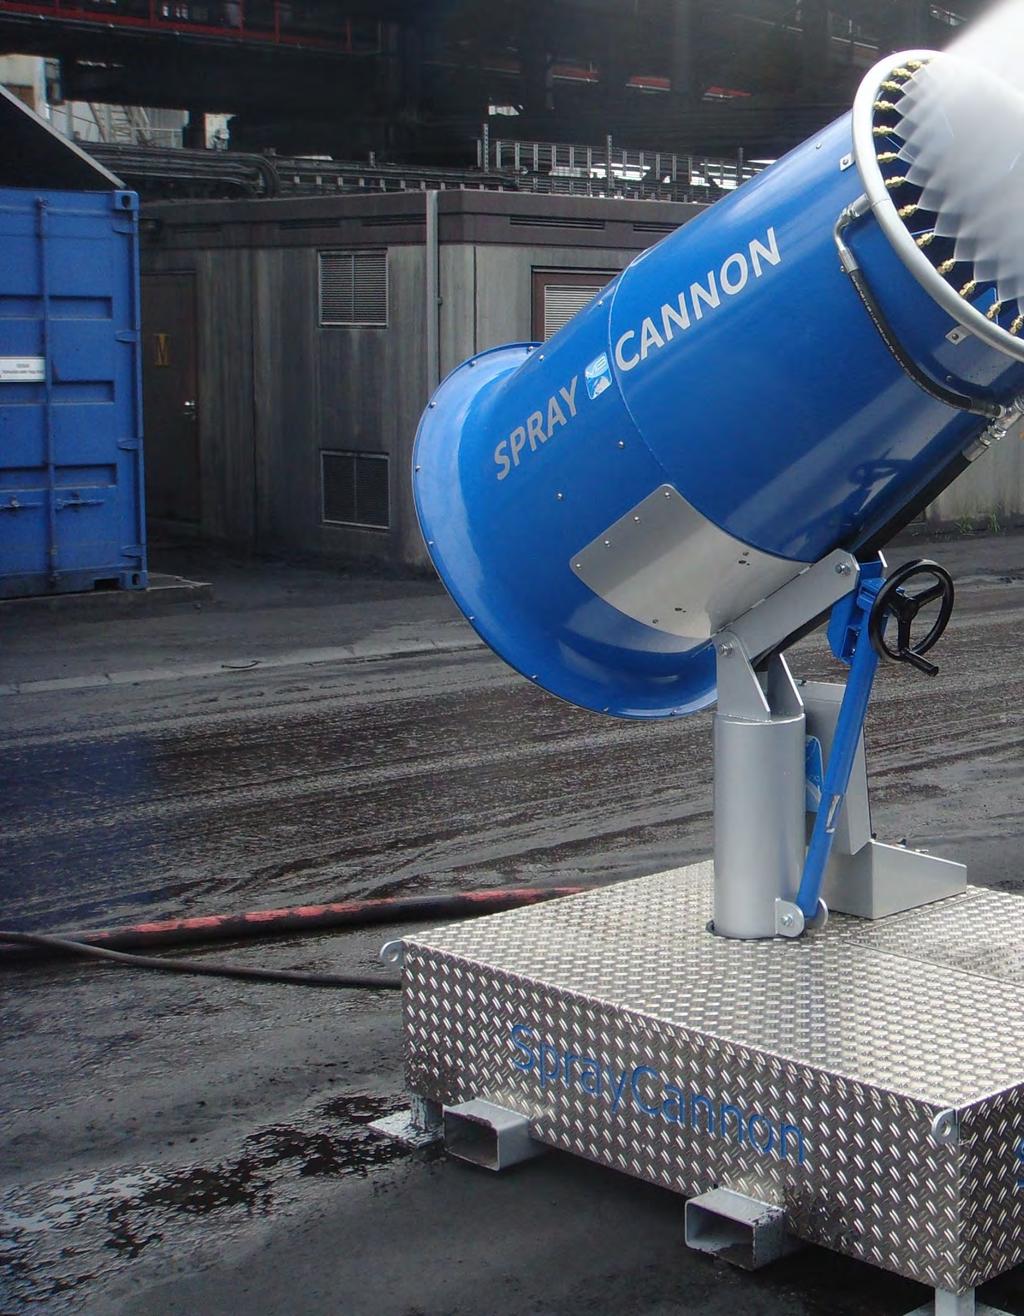 SPRAYCANNON SERIES OVERVIEW FINE DUST EMISSIONS ARE HAZARDOUS For years, MB Dustcontrol has been manufacturing the SprayCannon Series.